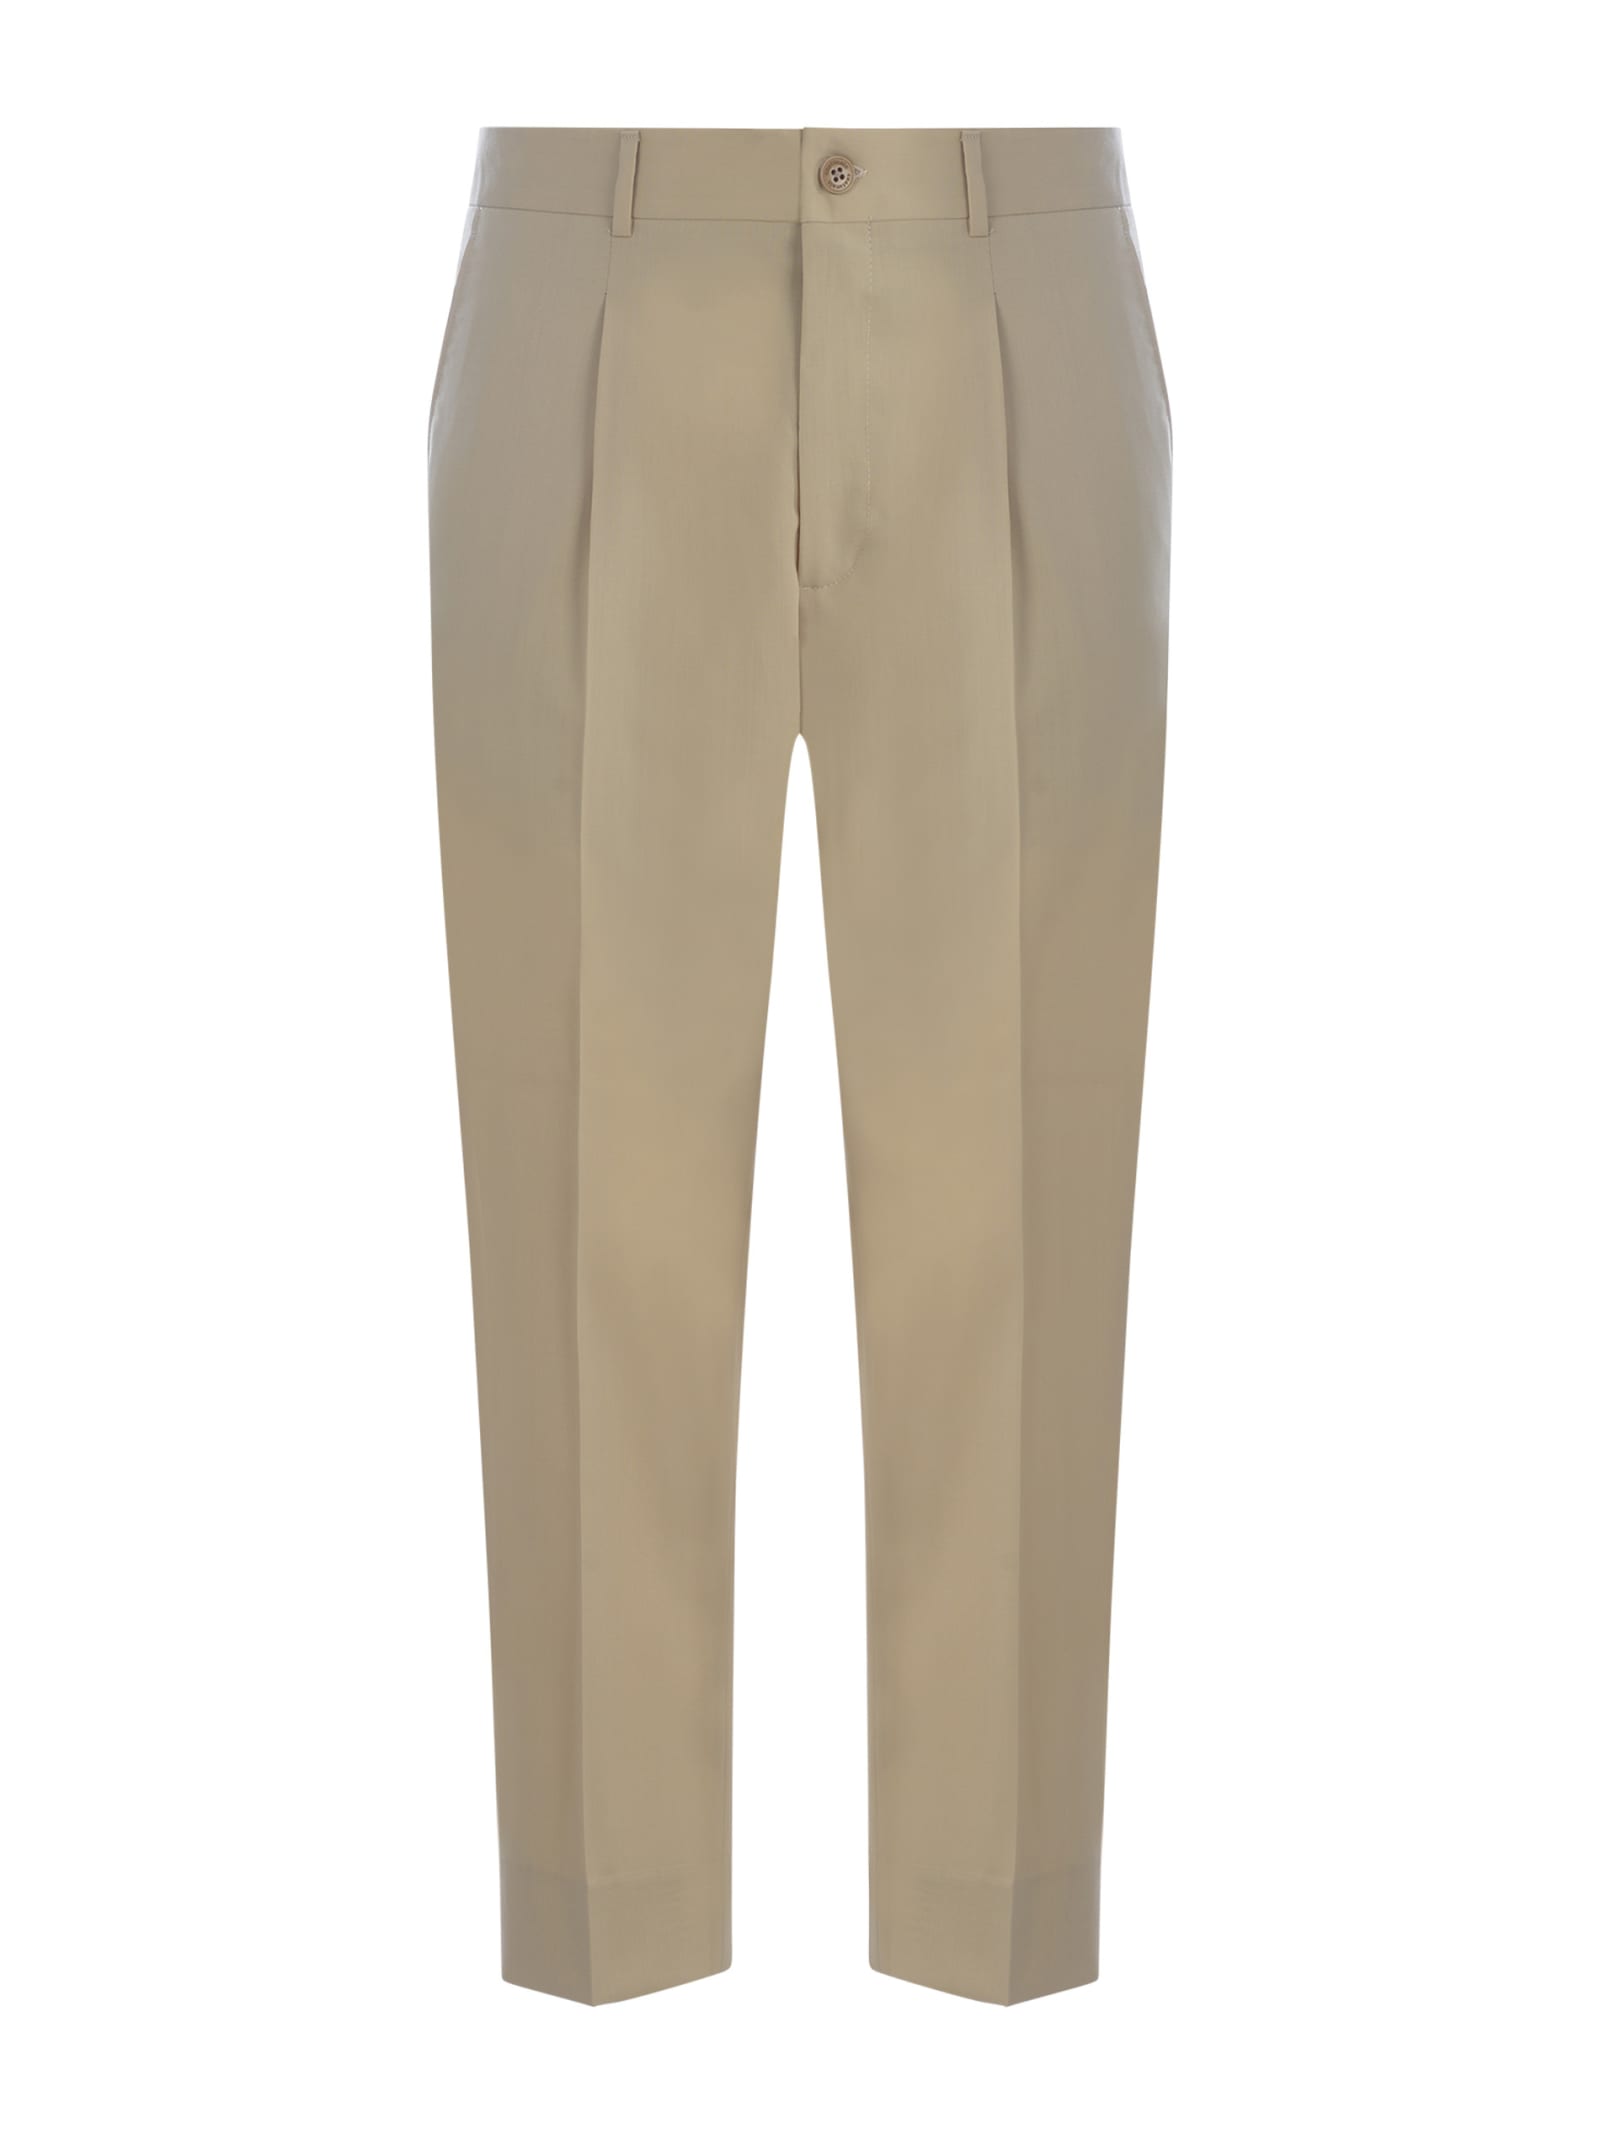 COSTUMEIN TROUSERS COSTUMEIN IN VIRGIN WOOL AVAILABLE STORE POMPEI